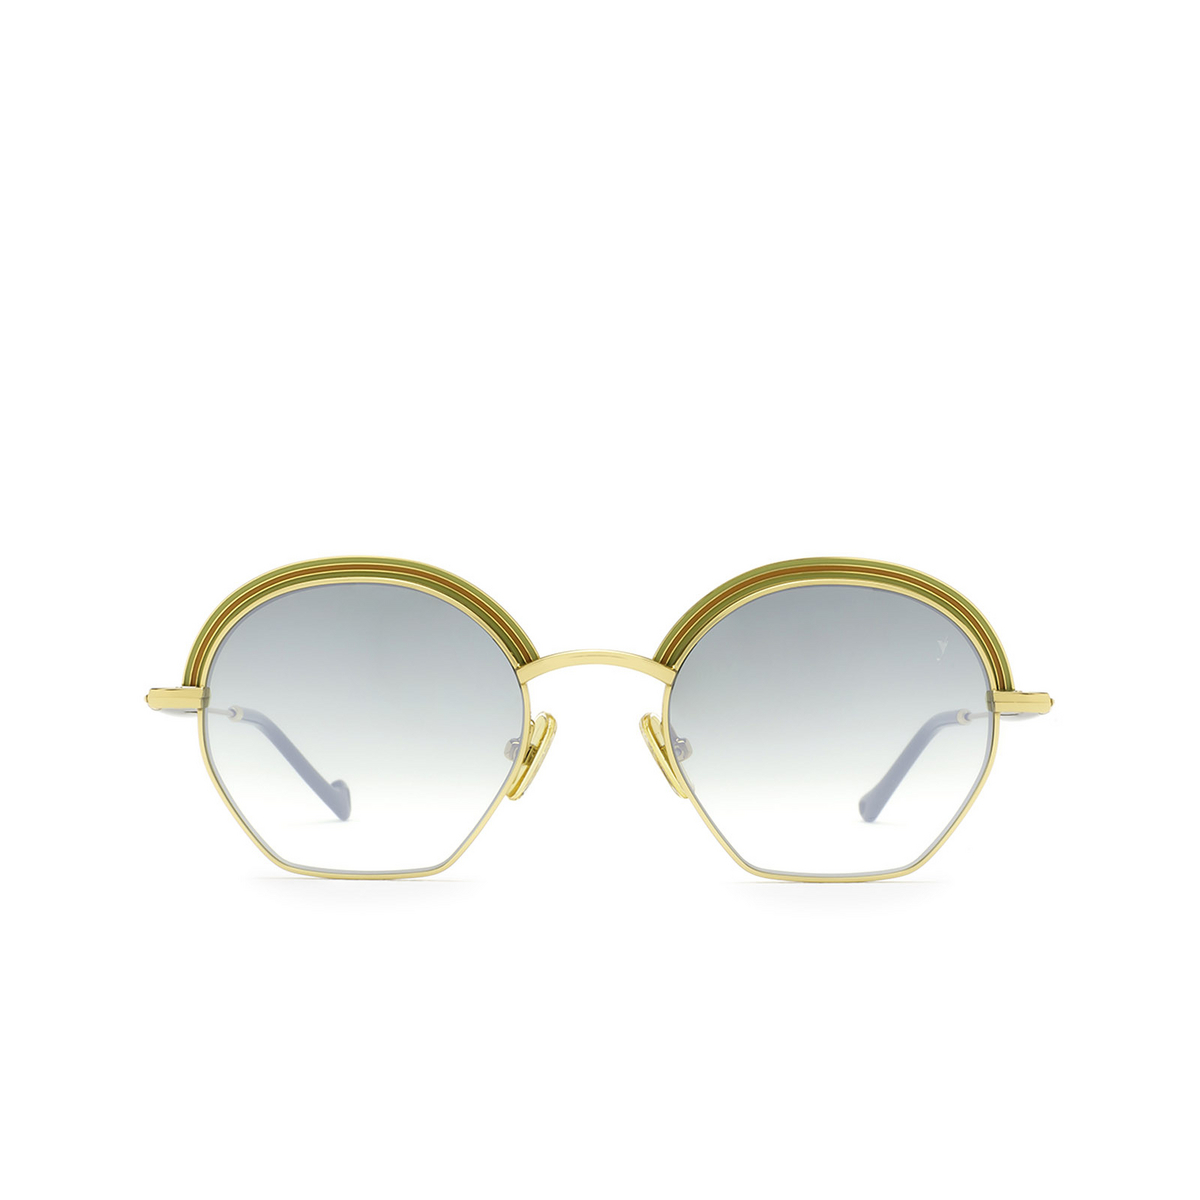 Eyepetizer® Irregular Sunglasses: Lumiere Sun color Green And Gold C.4-25F - front view.